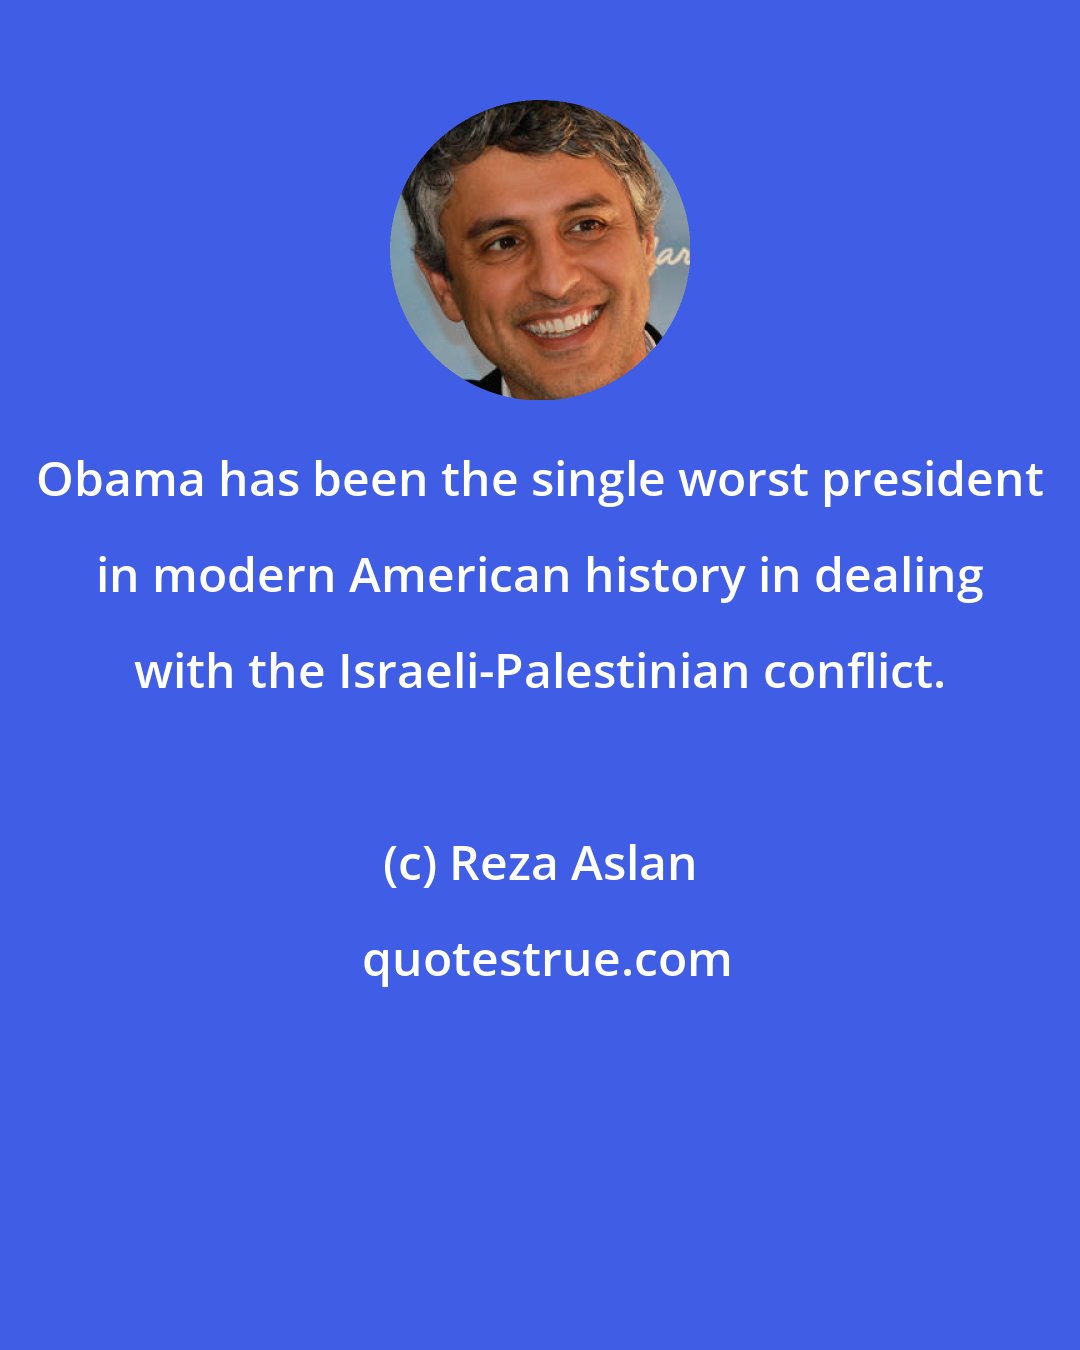 Reza Aslan: Obama has been the single worst president in modern American history in dealing with the Israeli-Palestinian conflict.